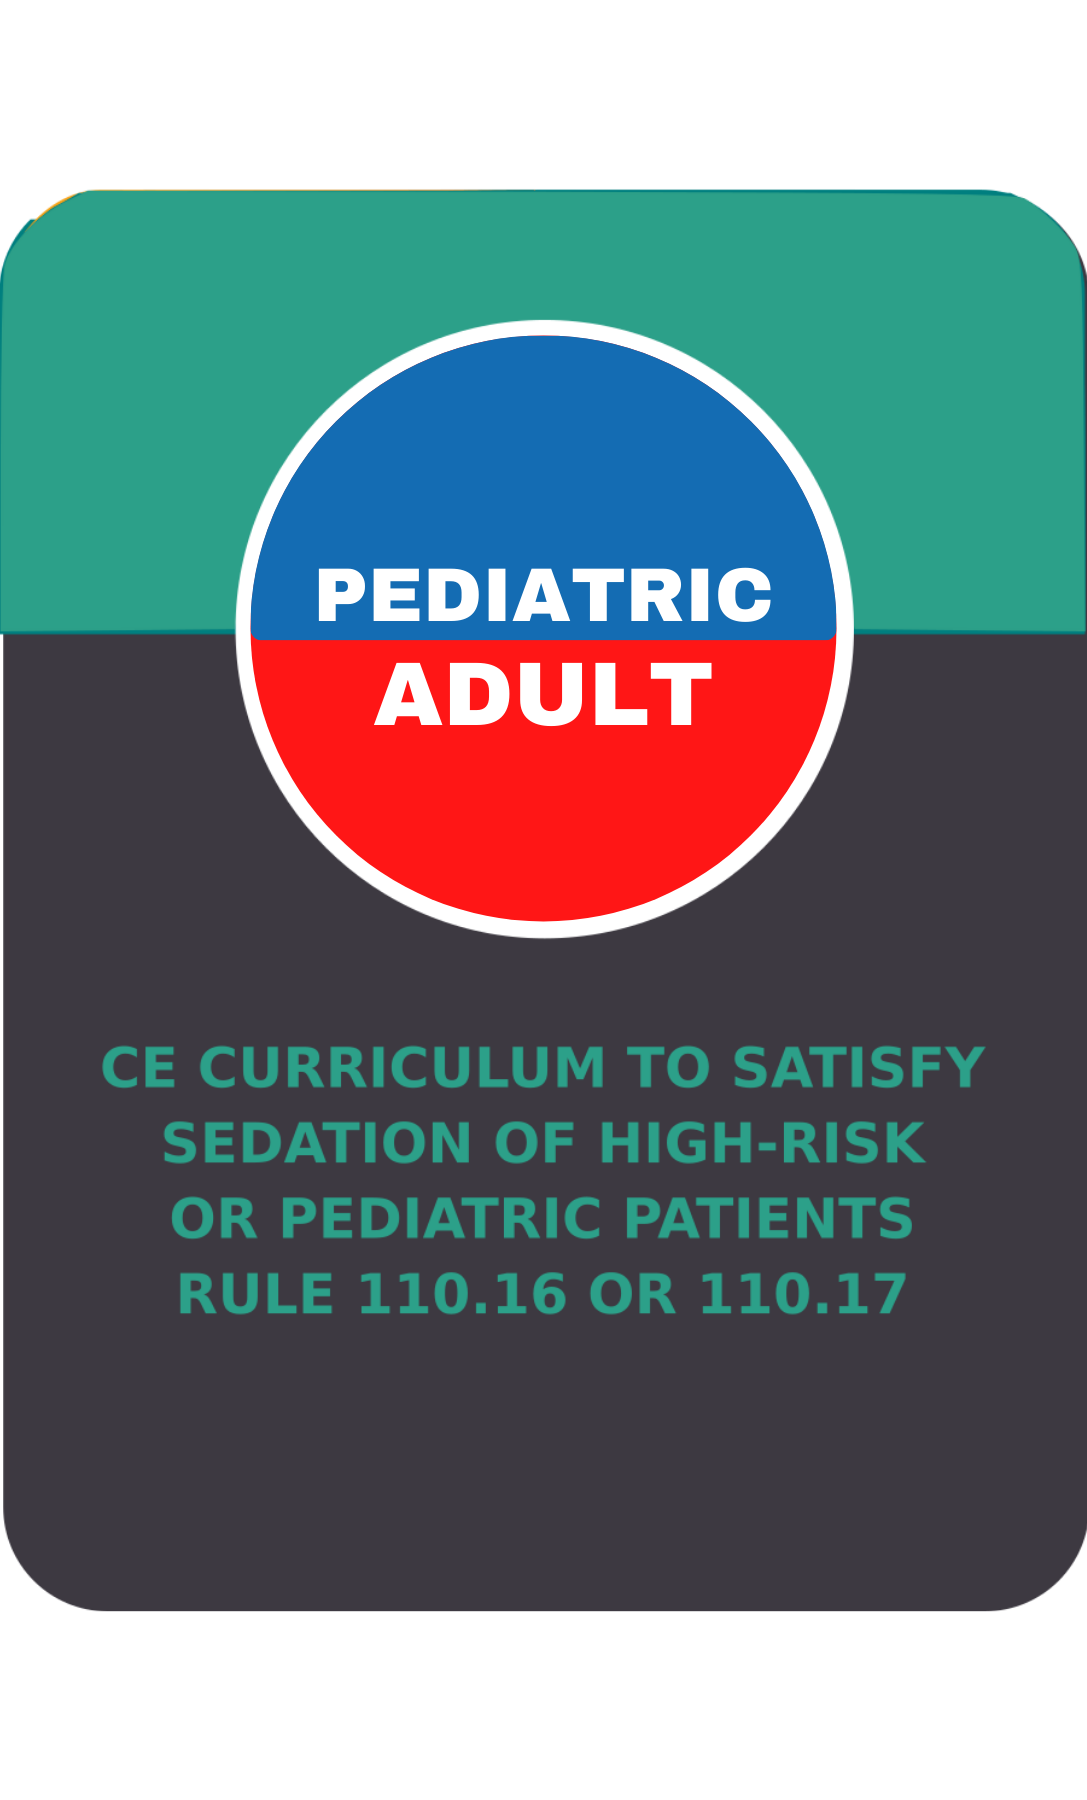 SEDATION OF HIGH-RISK AND PEDIATRIC PATIENTS RULES 110.16 & 110.17